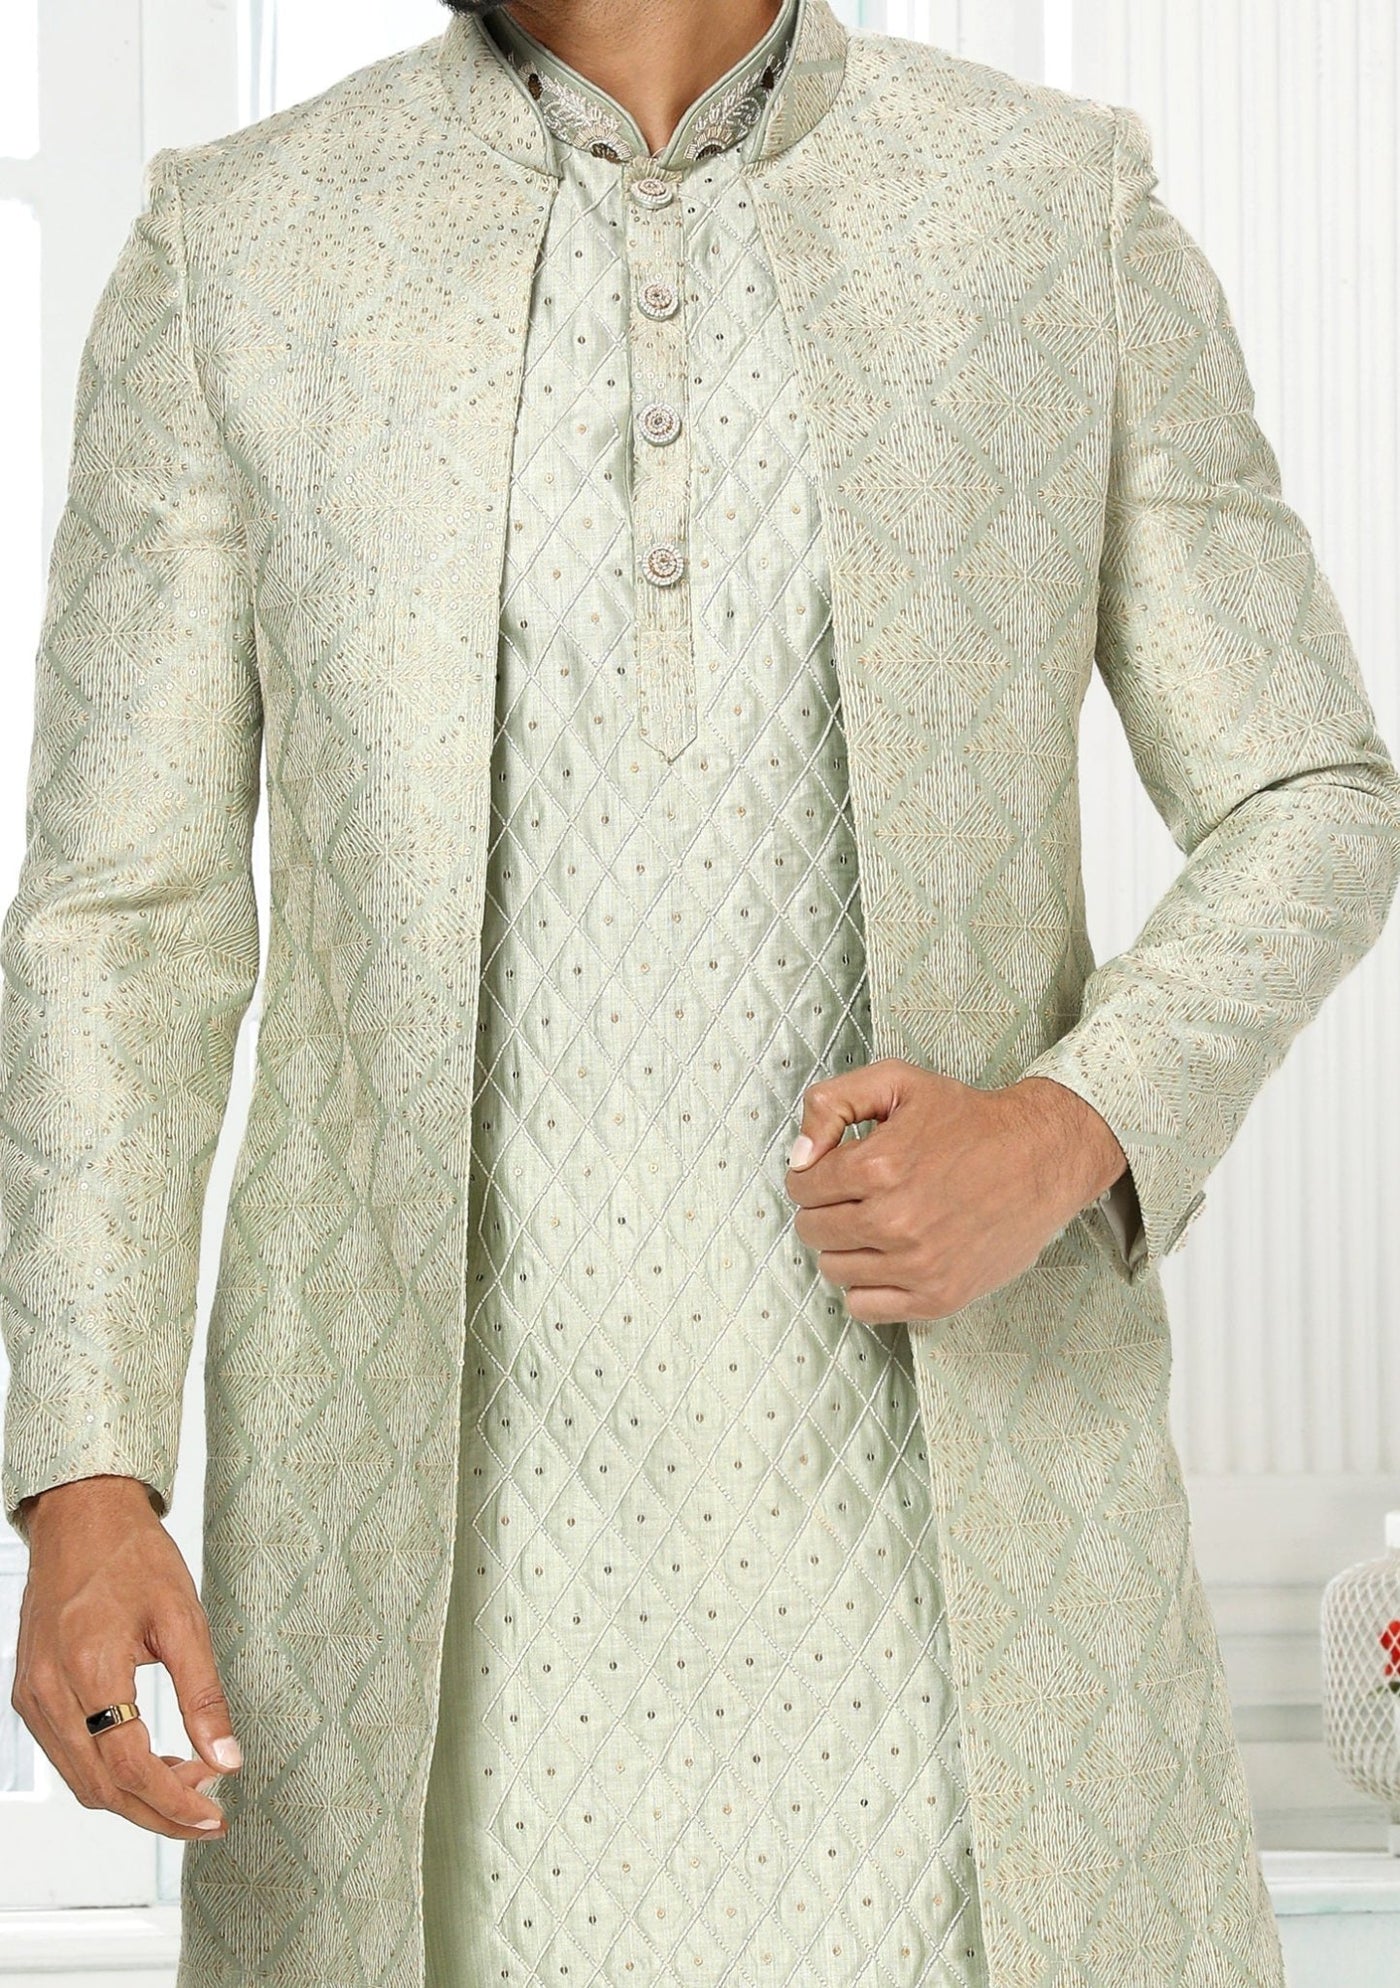 Men's Indo Western Party Wear Sherwani Suit With Jacket - db20427